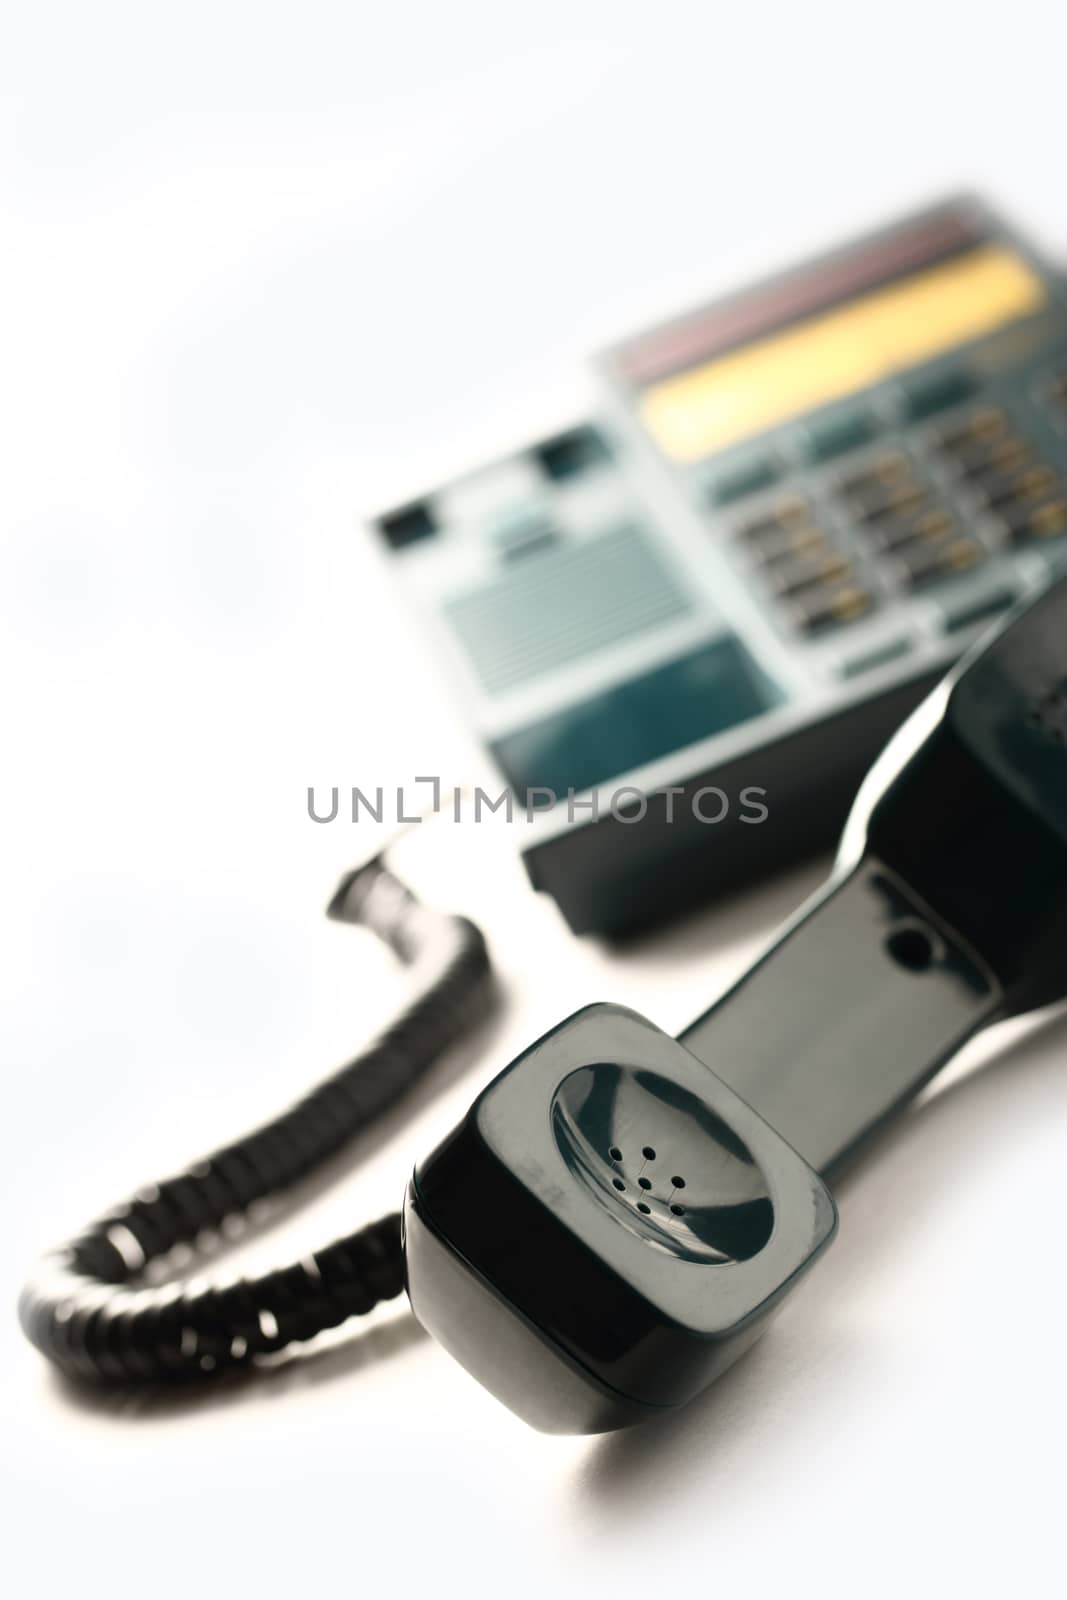 Stationary telephone receiver in closeup